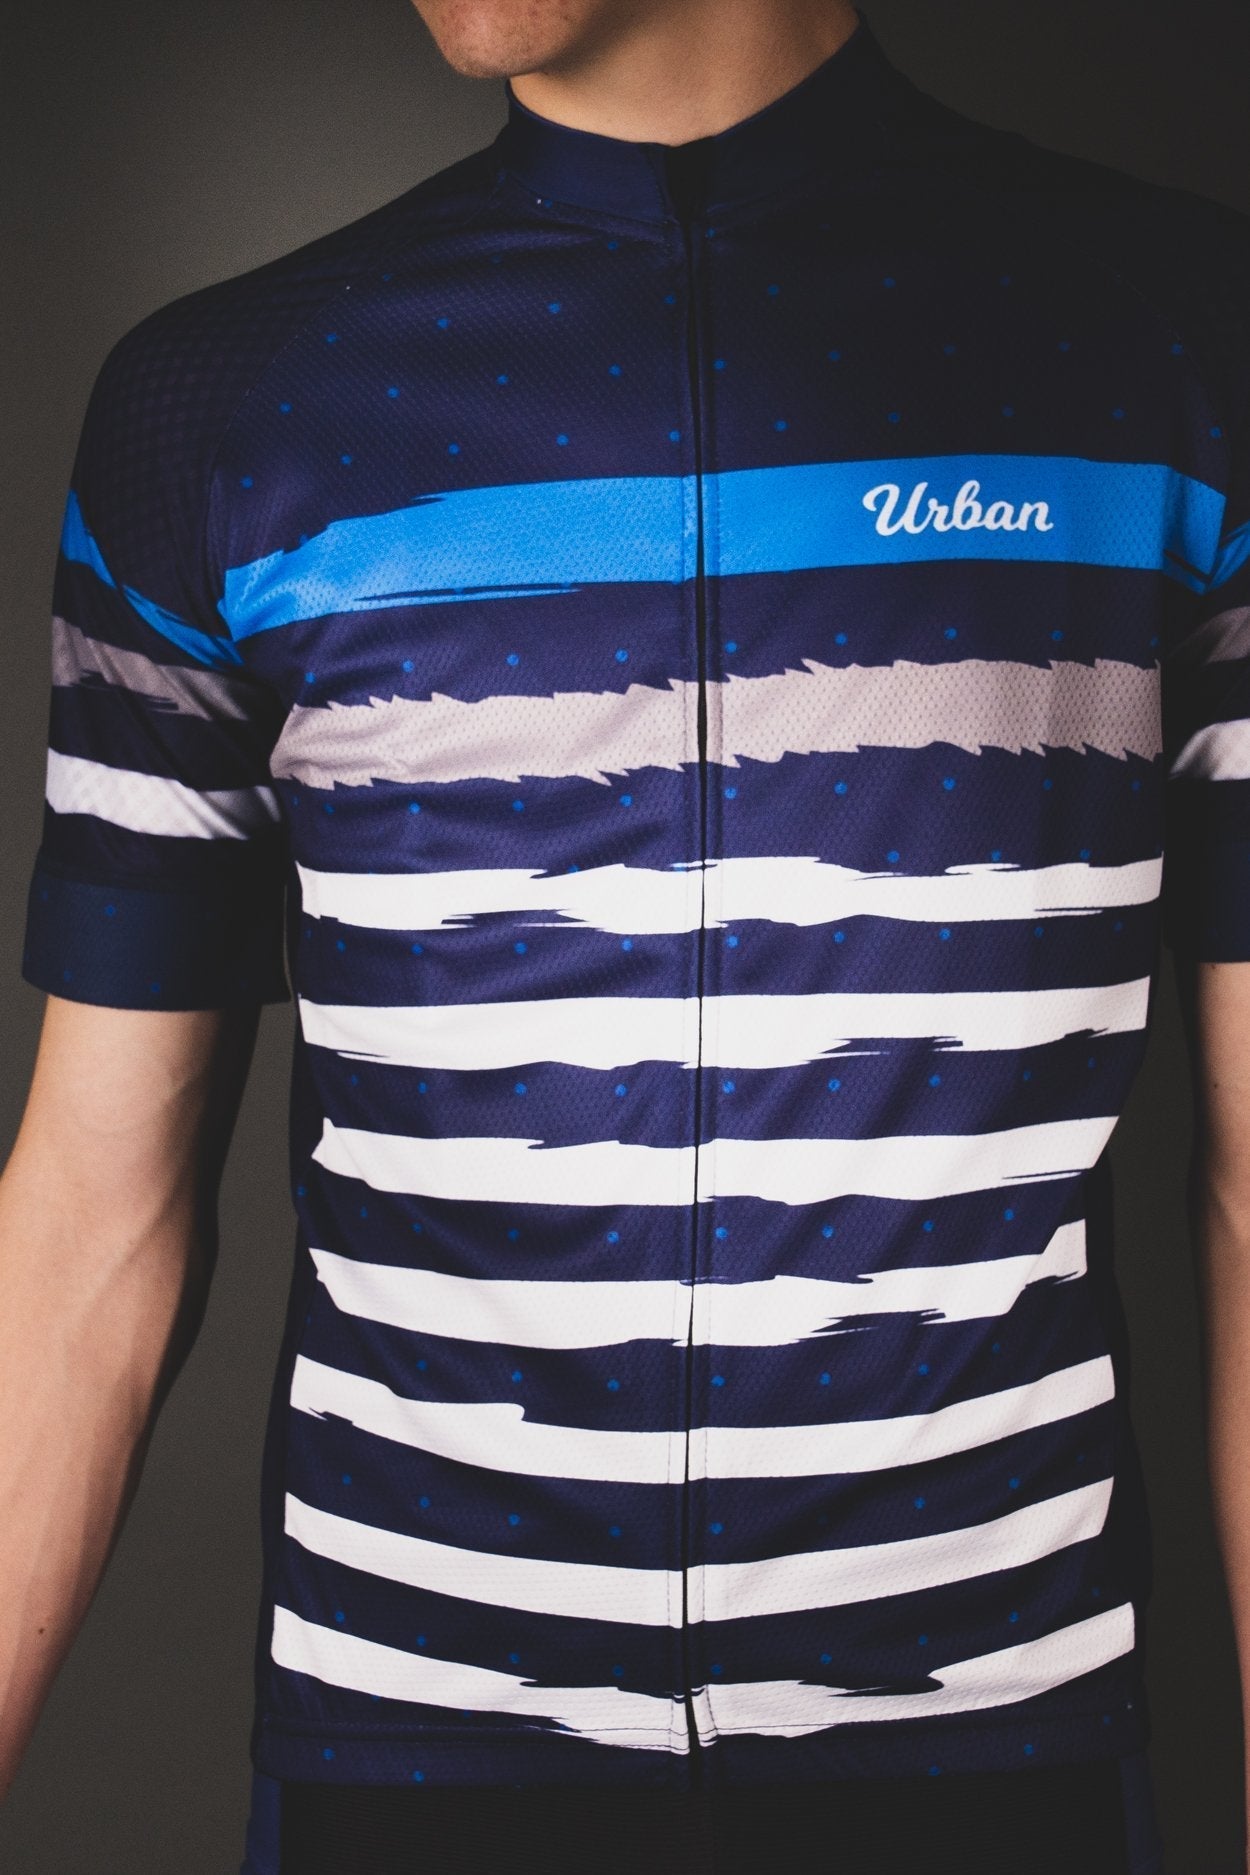 Choosing the Right Urban Cycling Apparel for Your Commute - Urban Cycling Apparel